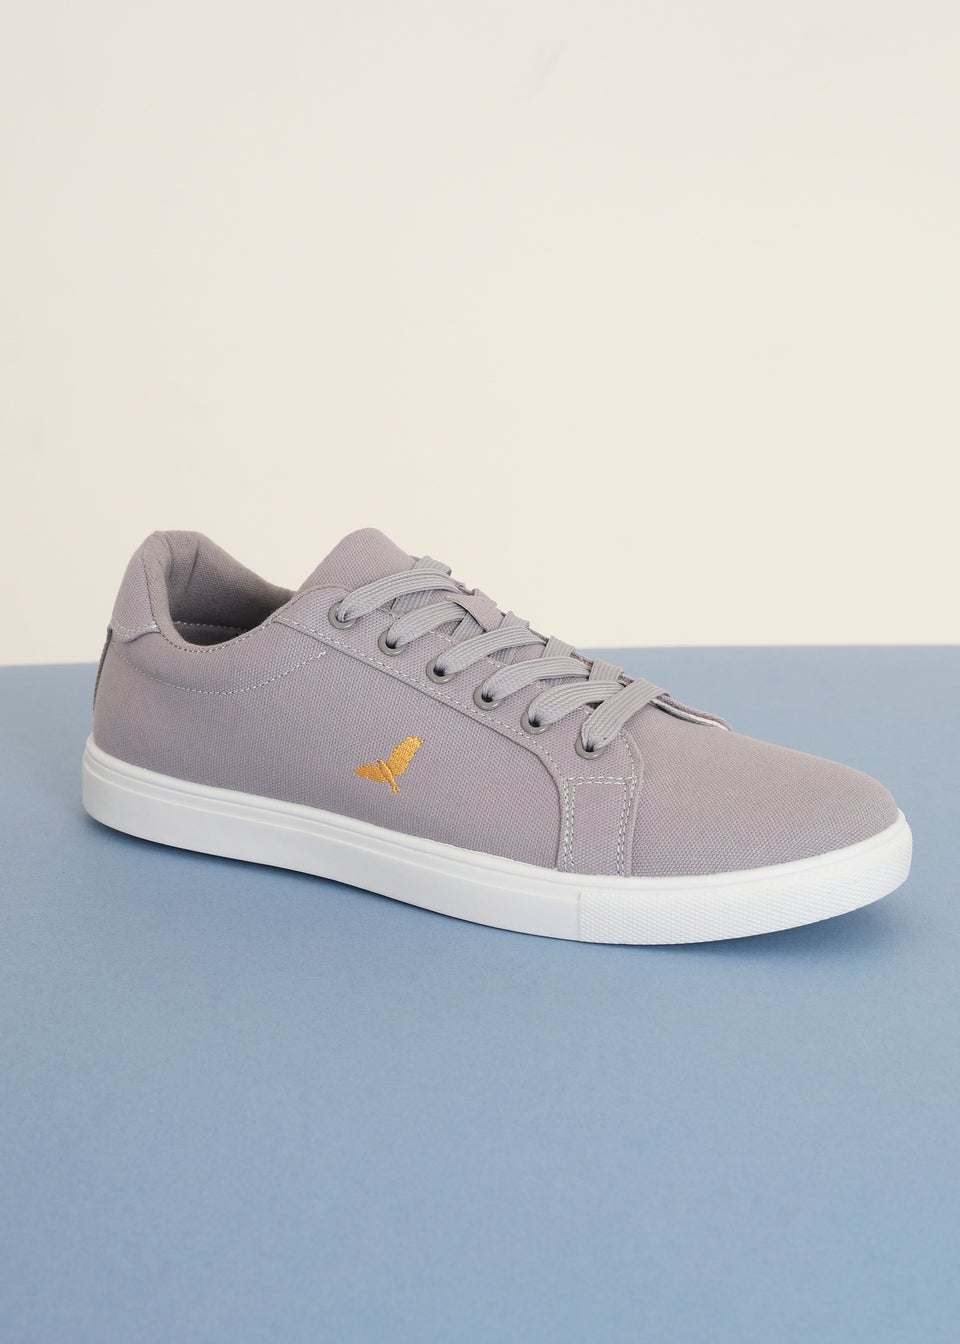 Brave Soul Grey Kite Canvas Lace Up Trainers